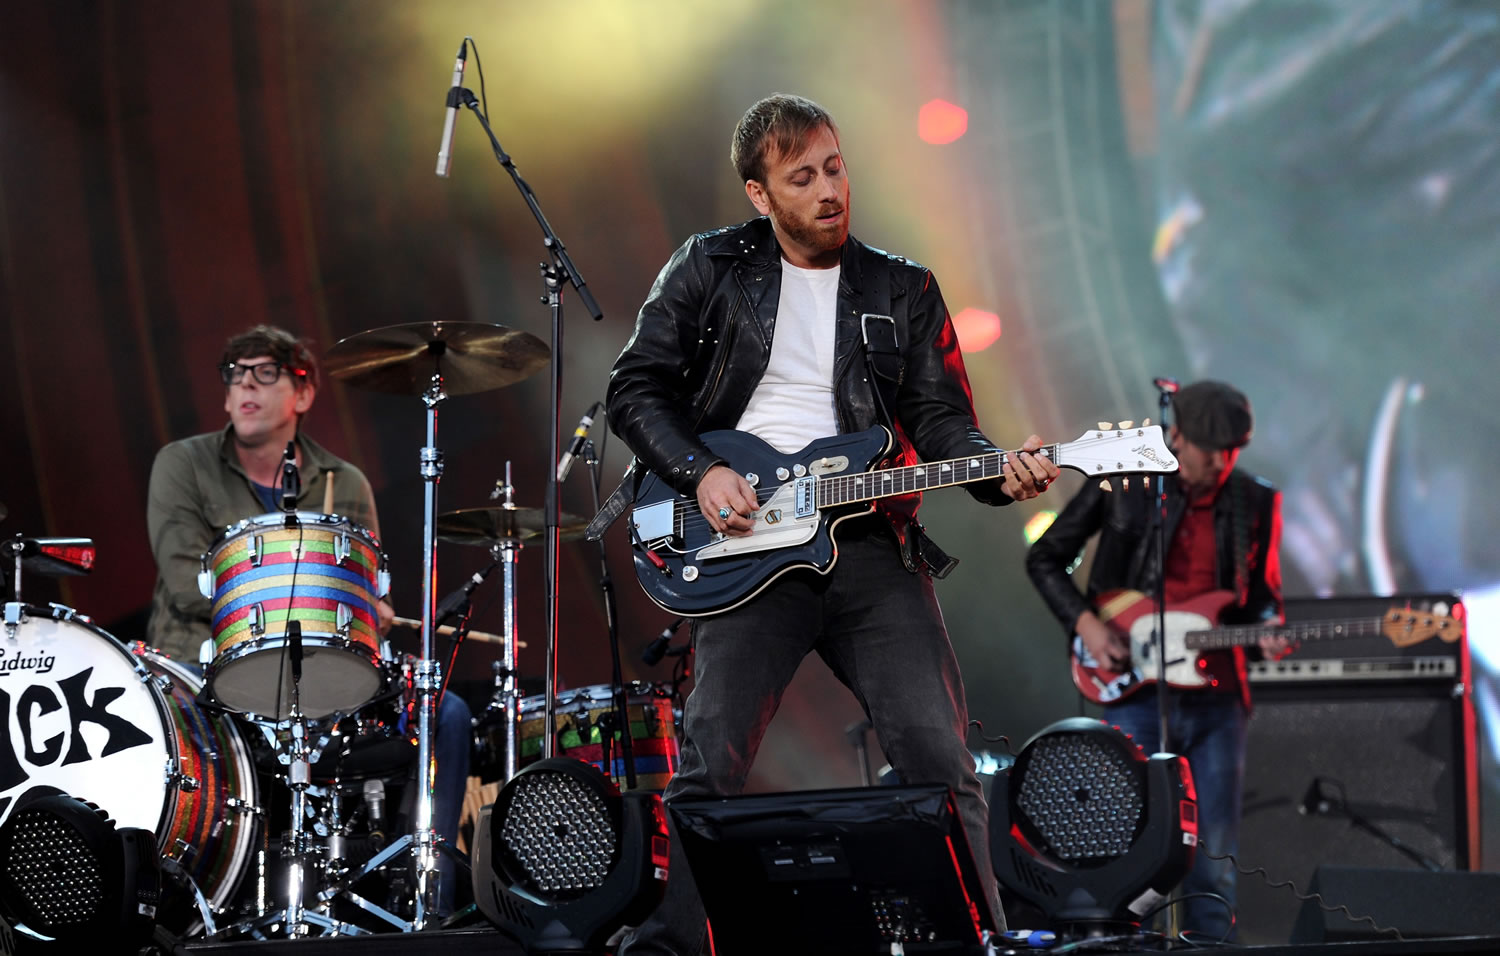 FILE - In this Sept. 29, 2012 file photo, guitarist Dan Auerbach, center, and drummer Patrick Carney of The Black Keys perform at the Global Citizen Festival in Central Park, in New York.